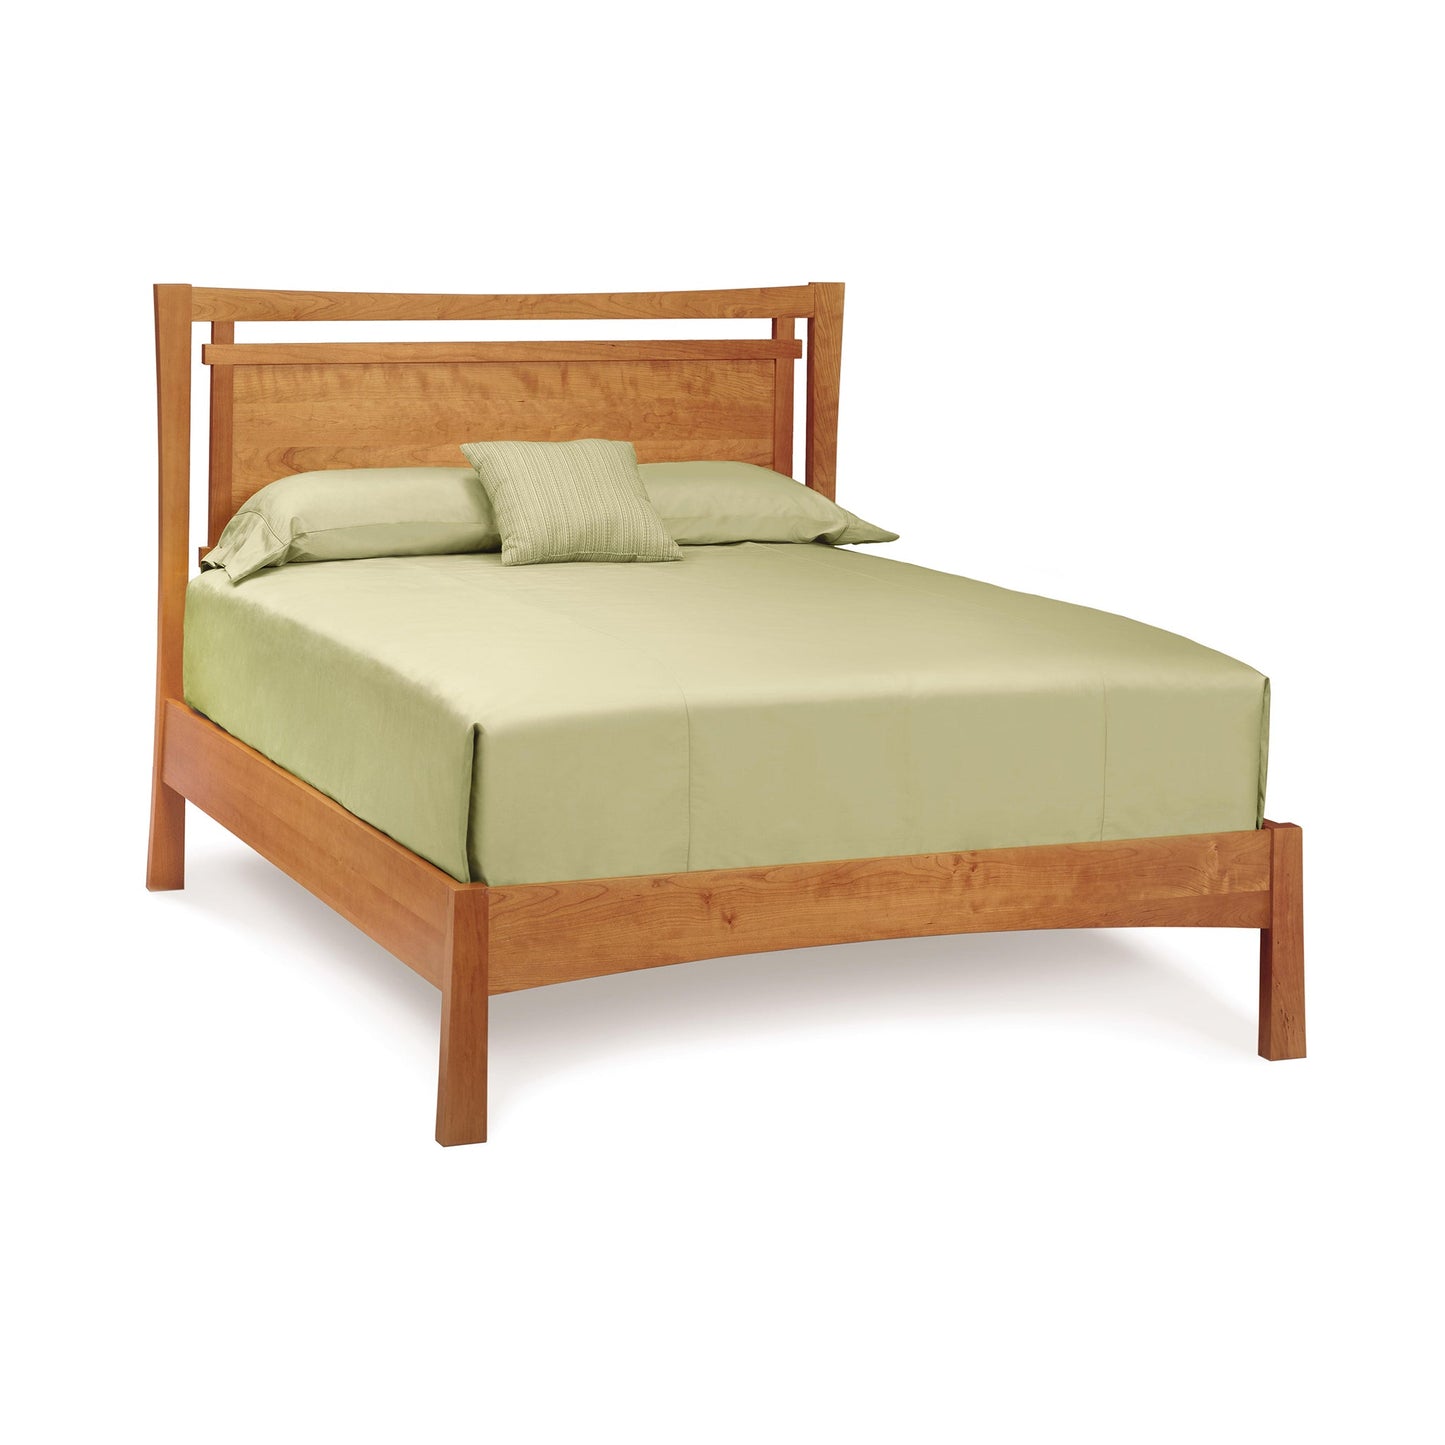 A wooden bed with a green sheet on it.